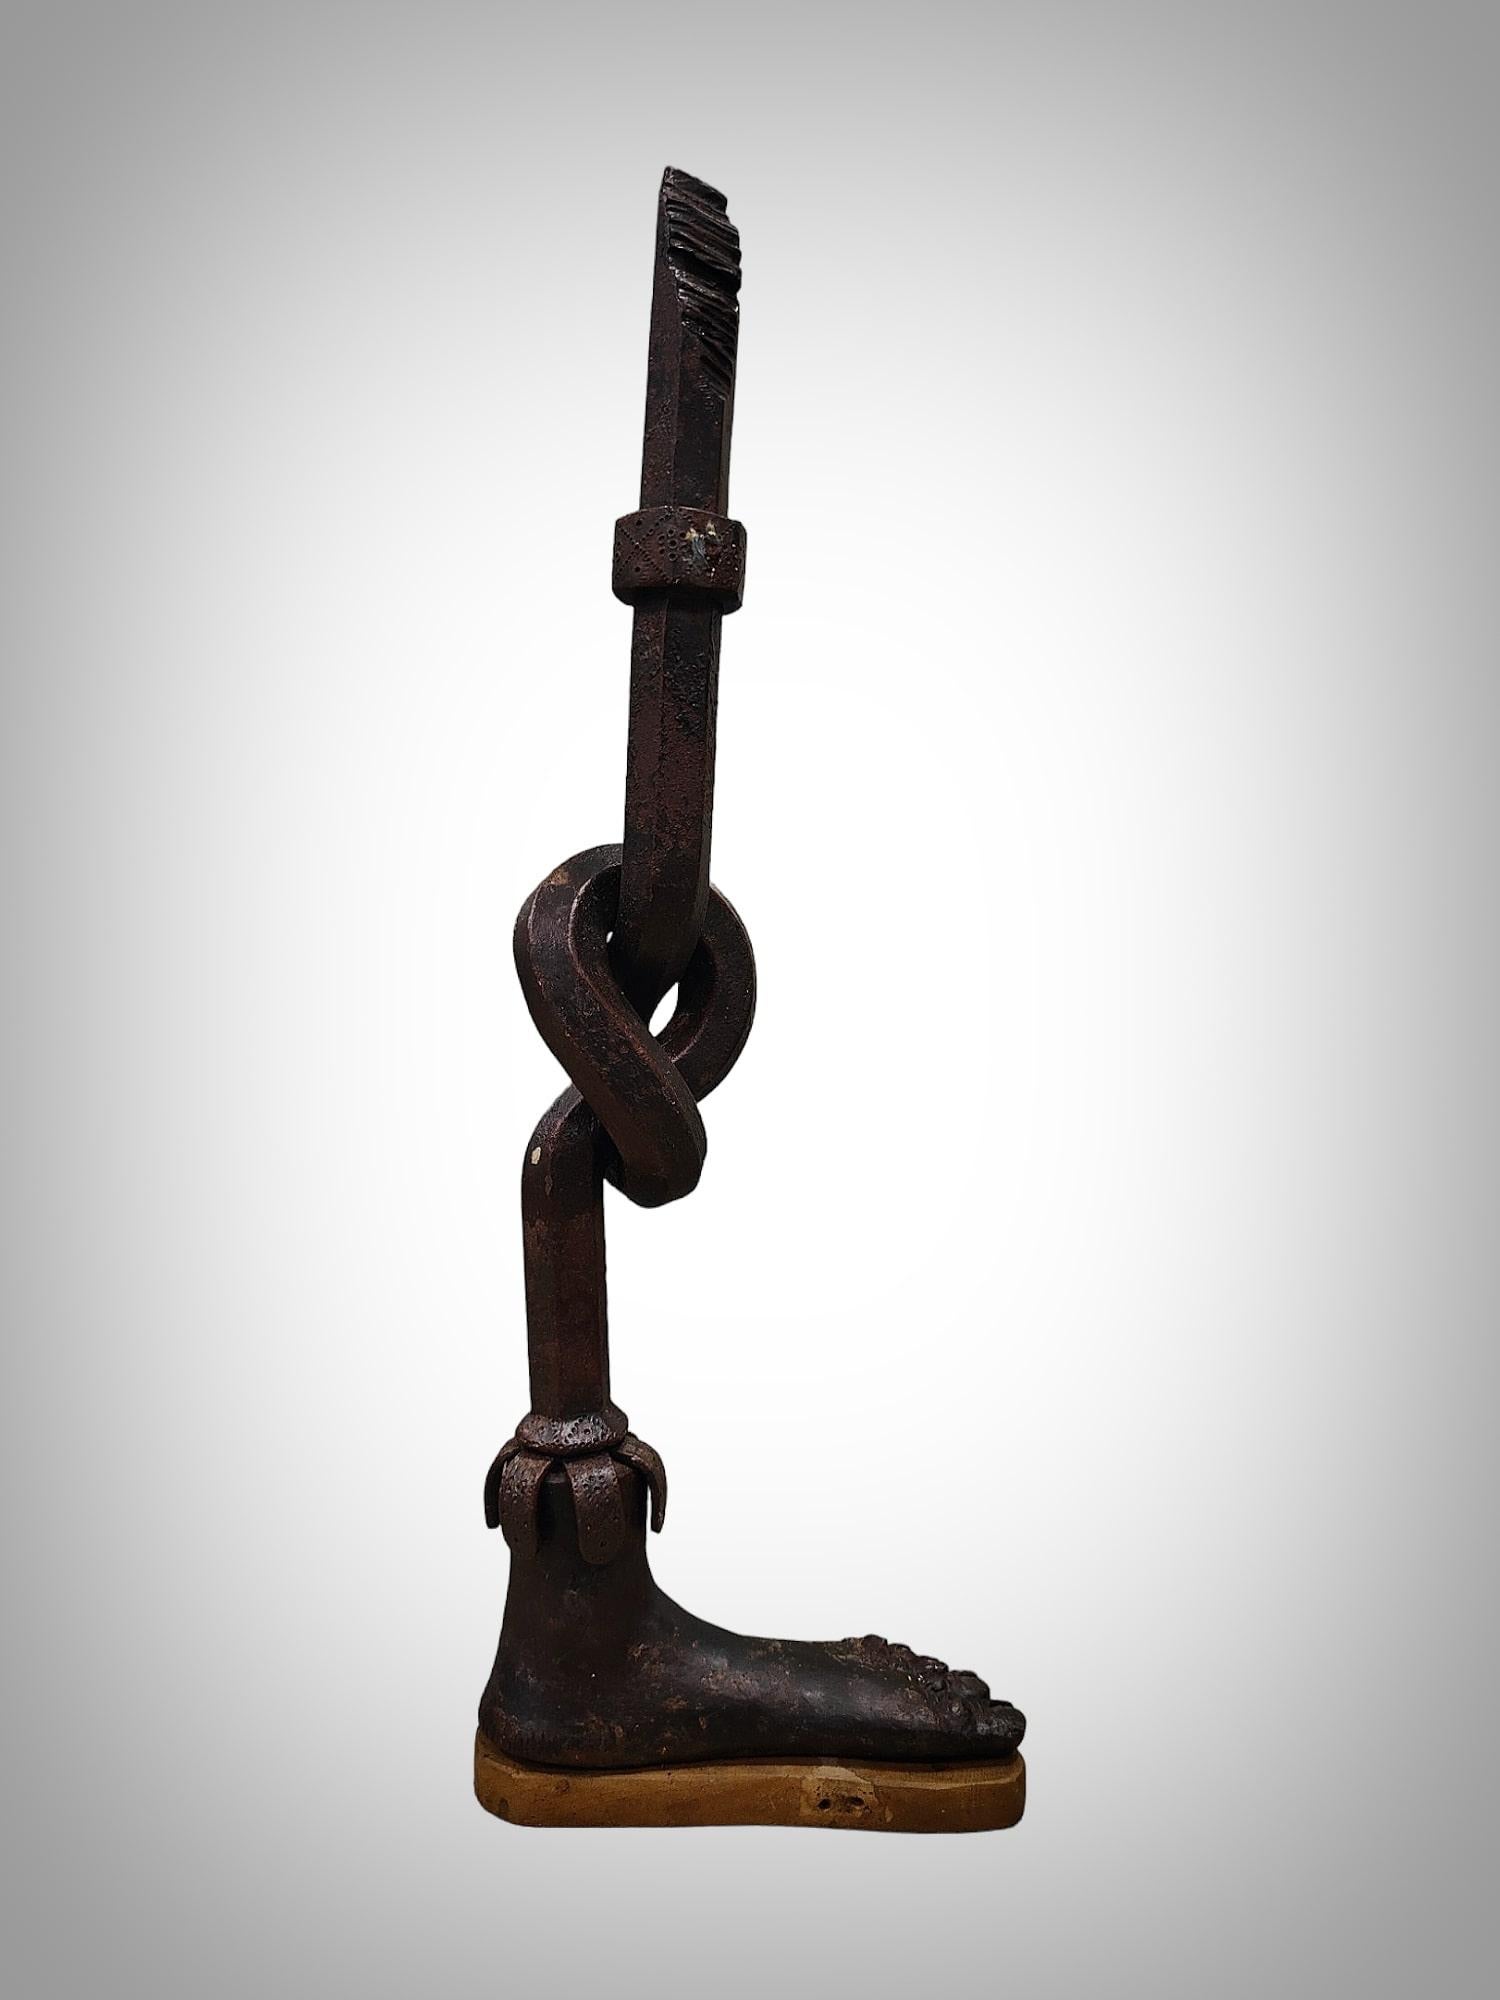 Introducing an elegant forged iron sculpture, meticulously crafted by a master blacksmith at the forge. This work, executed with various techniques of hot ironwork, reflects the artisanal skill and technical mastery of its creator. Measuring 70x22x9